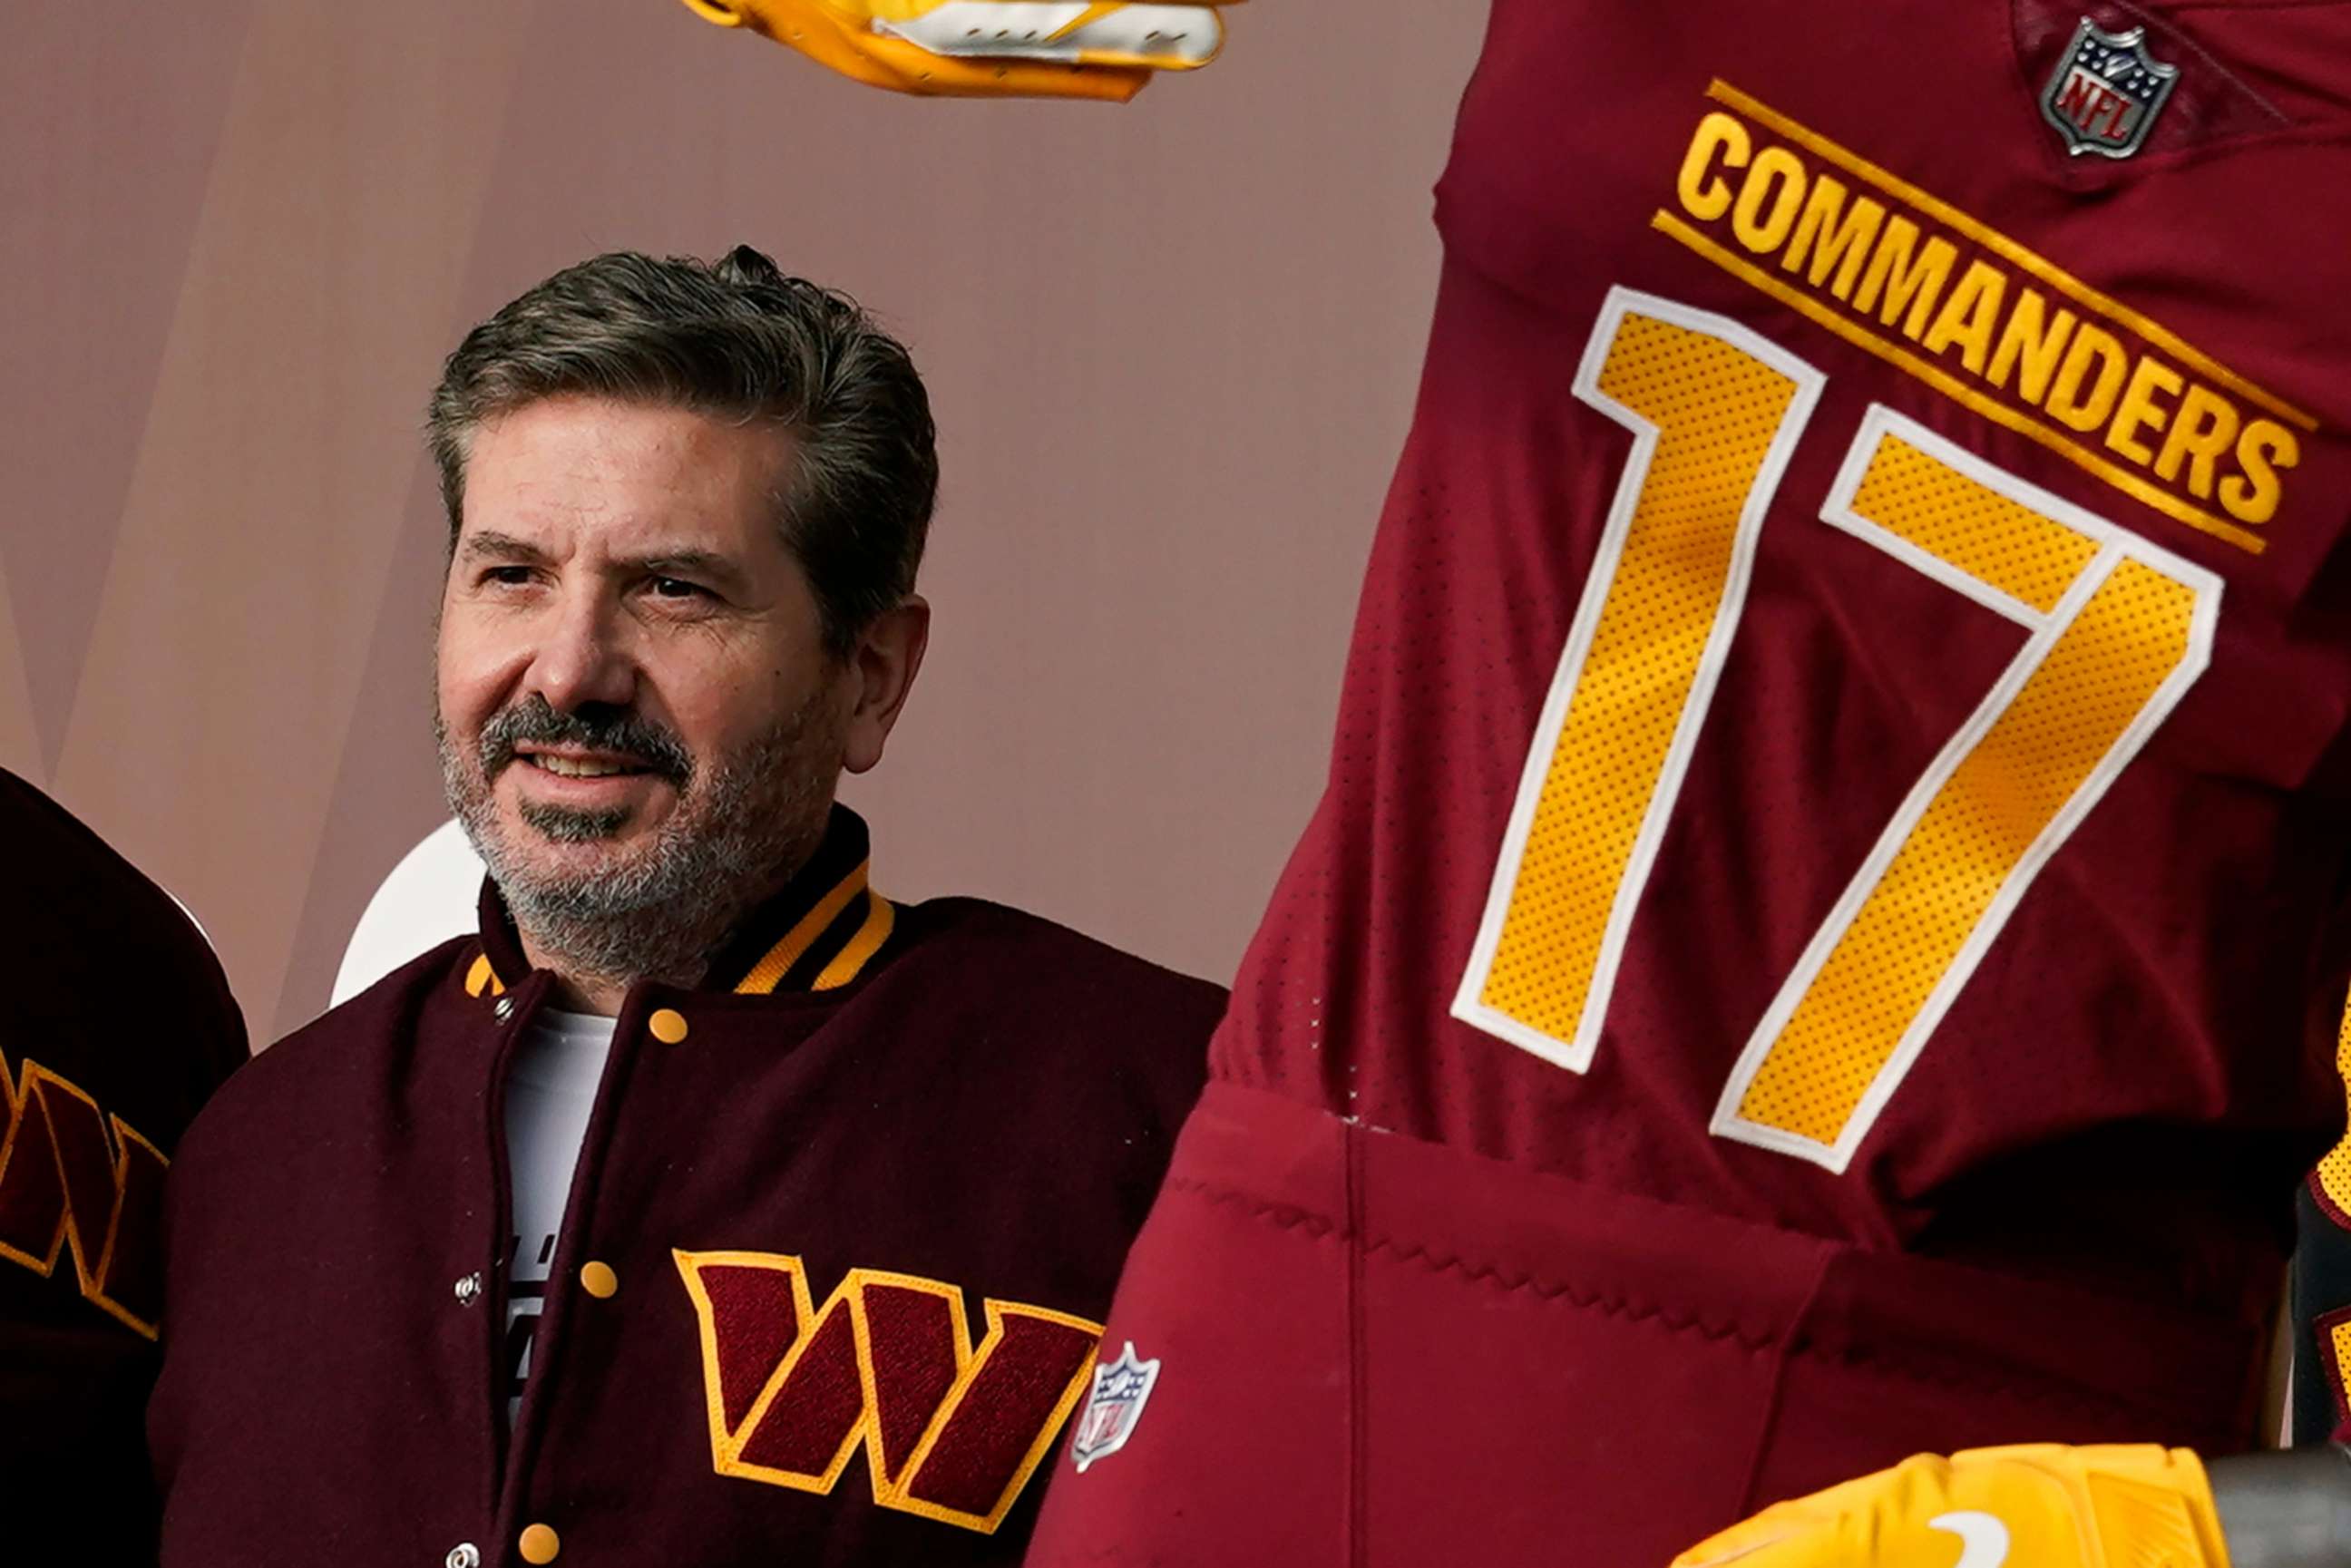 PHOTO: Washington Commanders' Dan Snyder poses for photos during an event to unveil the NFL football team's new identity, Feb. 2, 2022, in Landover, Md. 